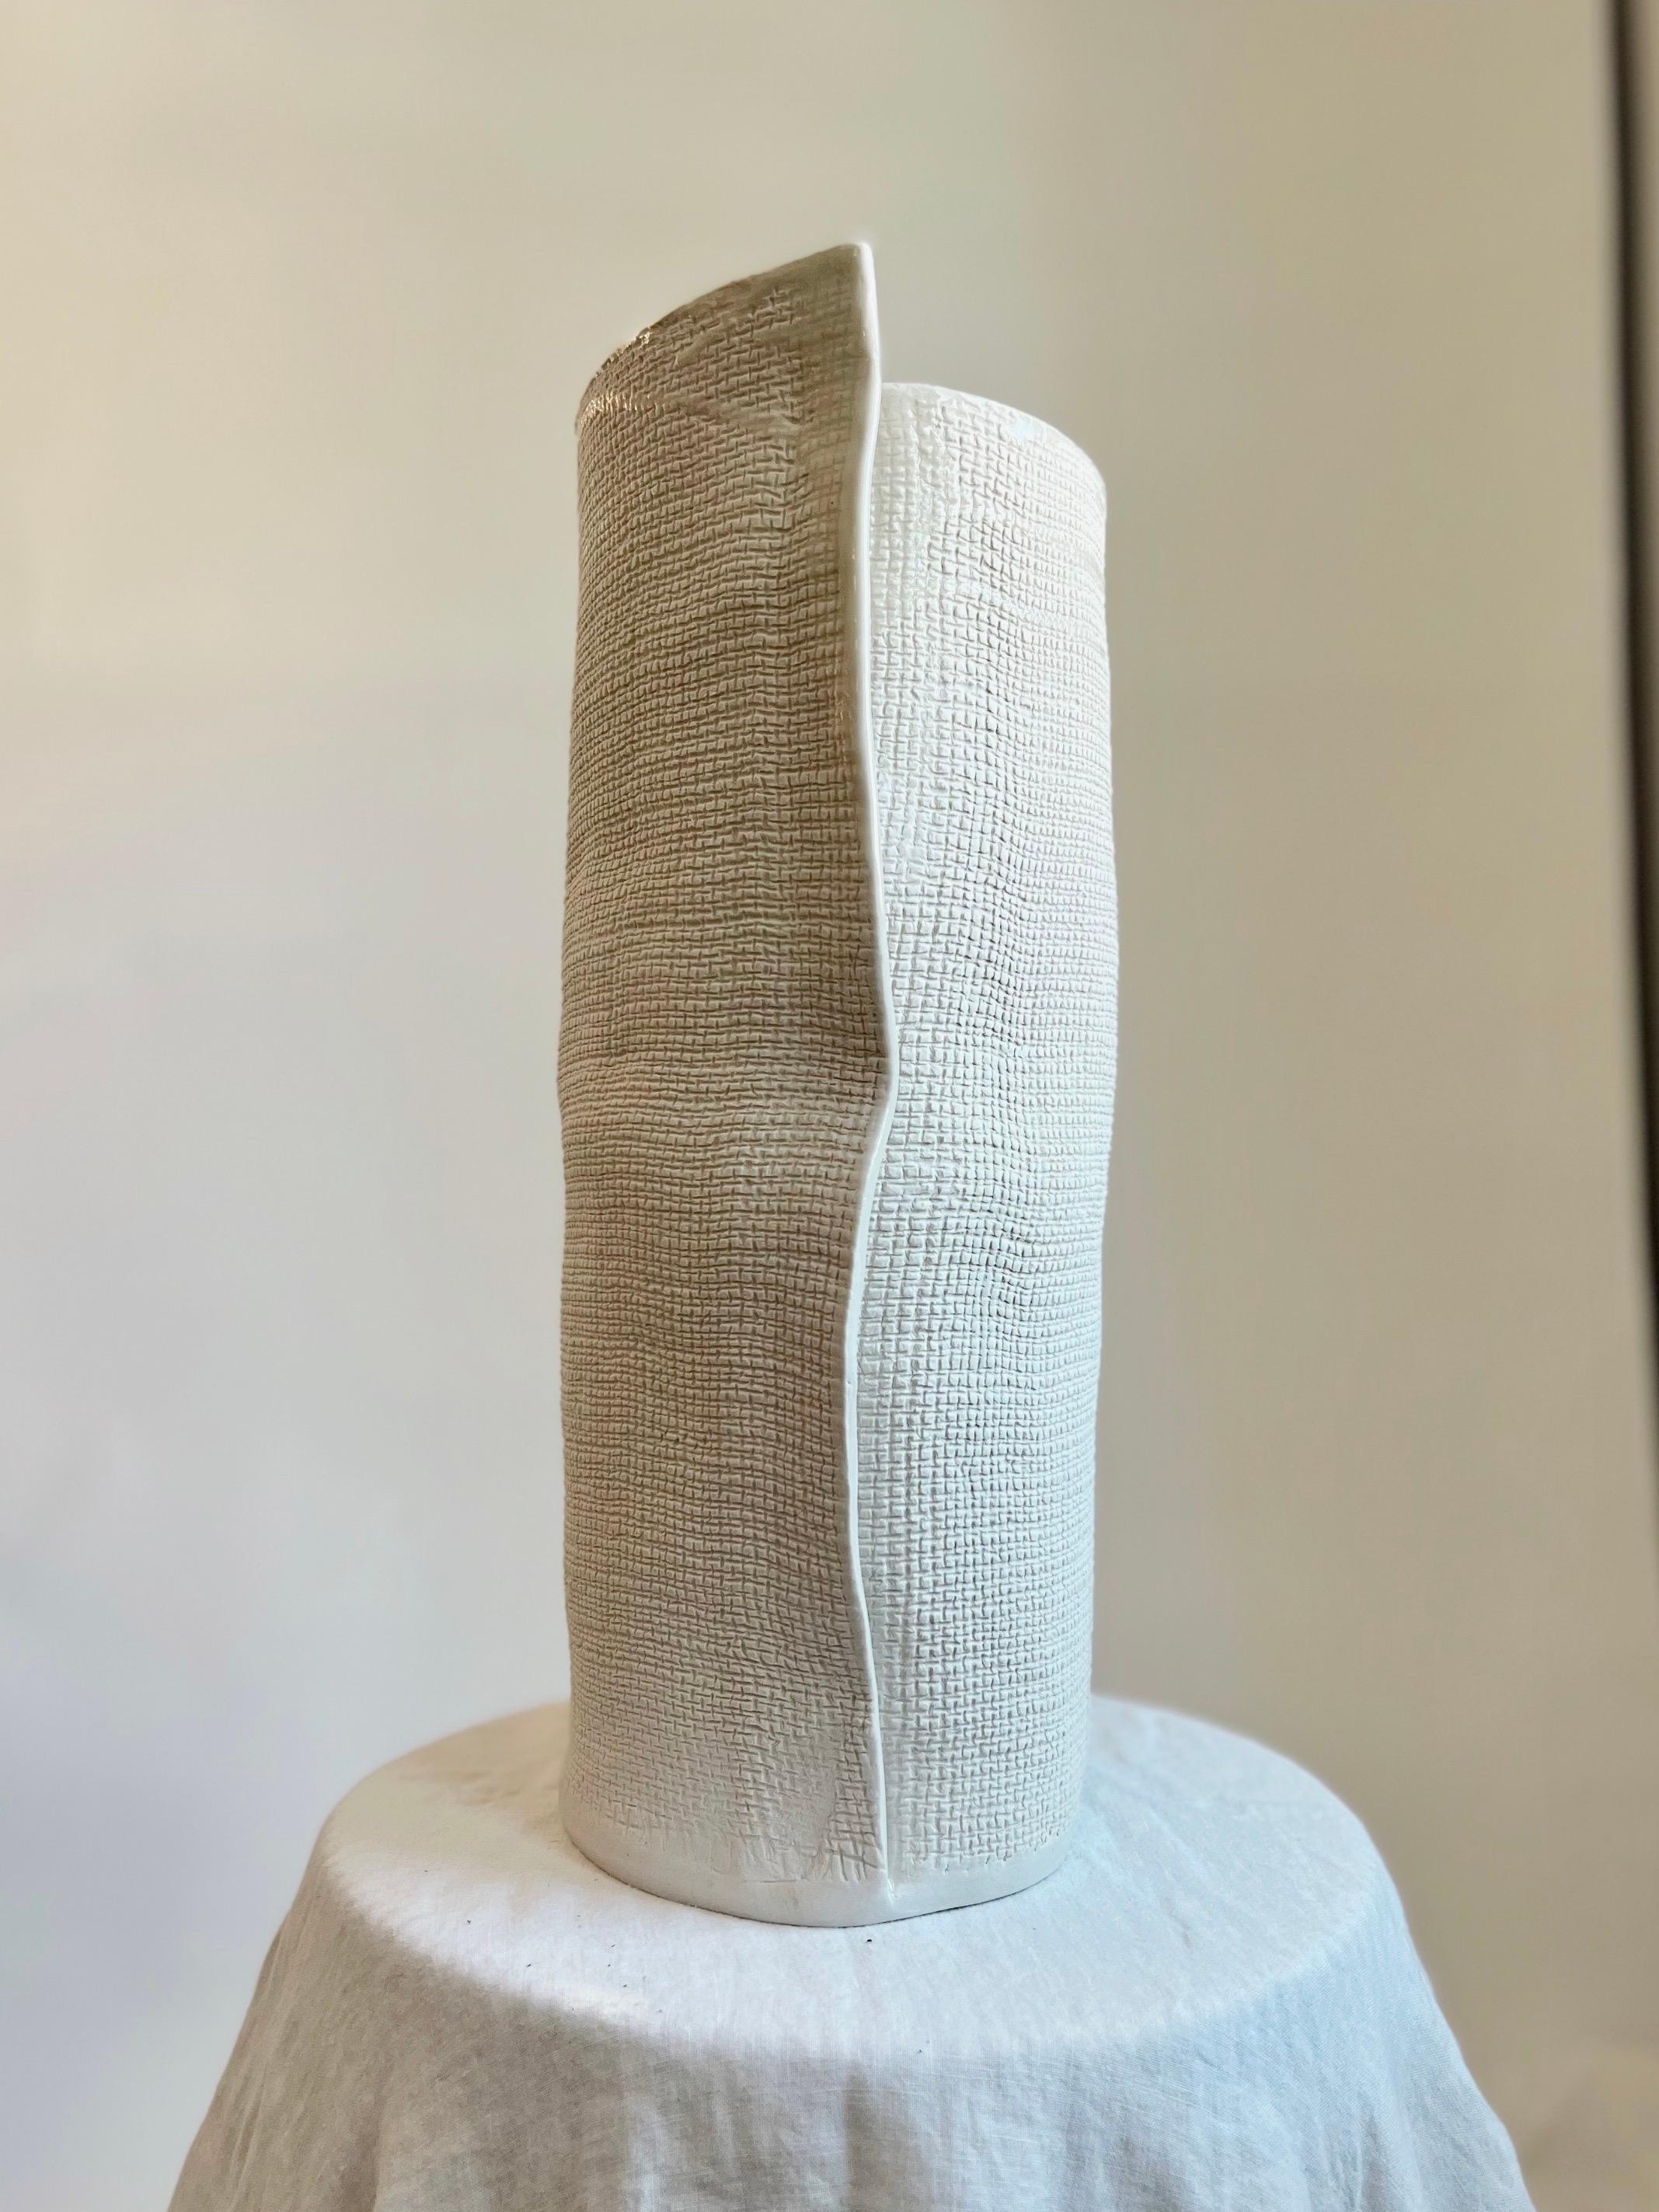 Our new Burlap Fold Series is a collection of minimalist cylinders resembling a slightly unfurled roll of cloth.

Burlap Fold’s simplicity lends itself to be piece that can be displayed on its own or as the container for arrangements.

Mixes